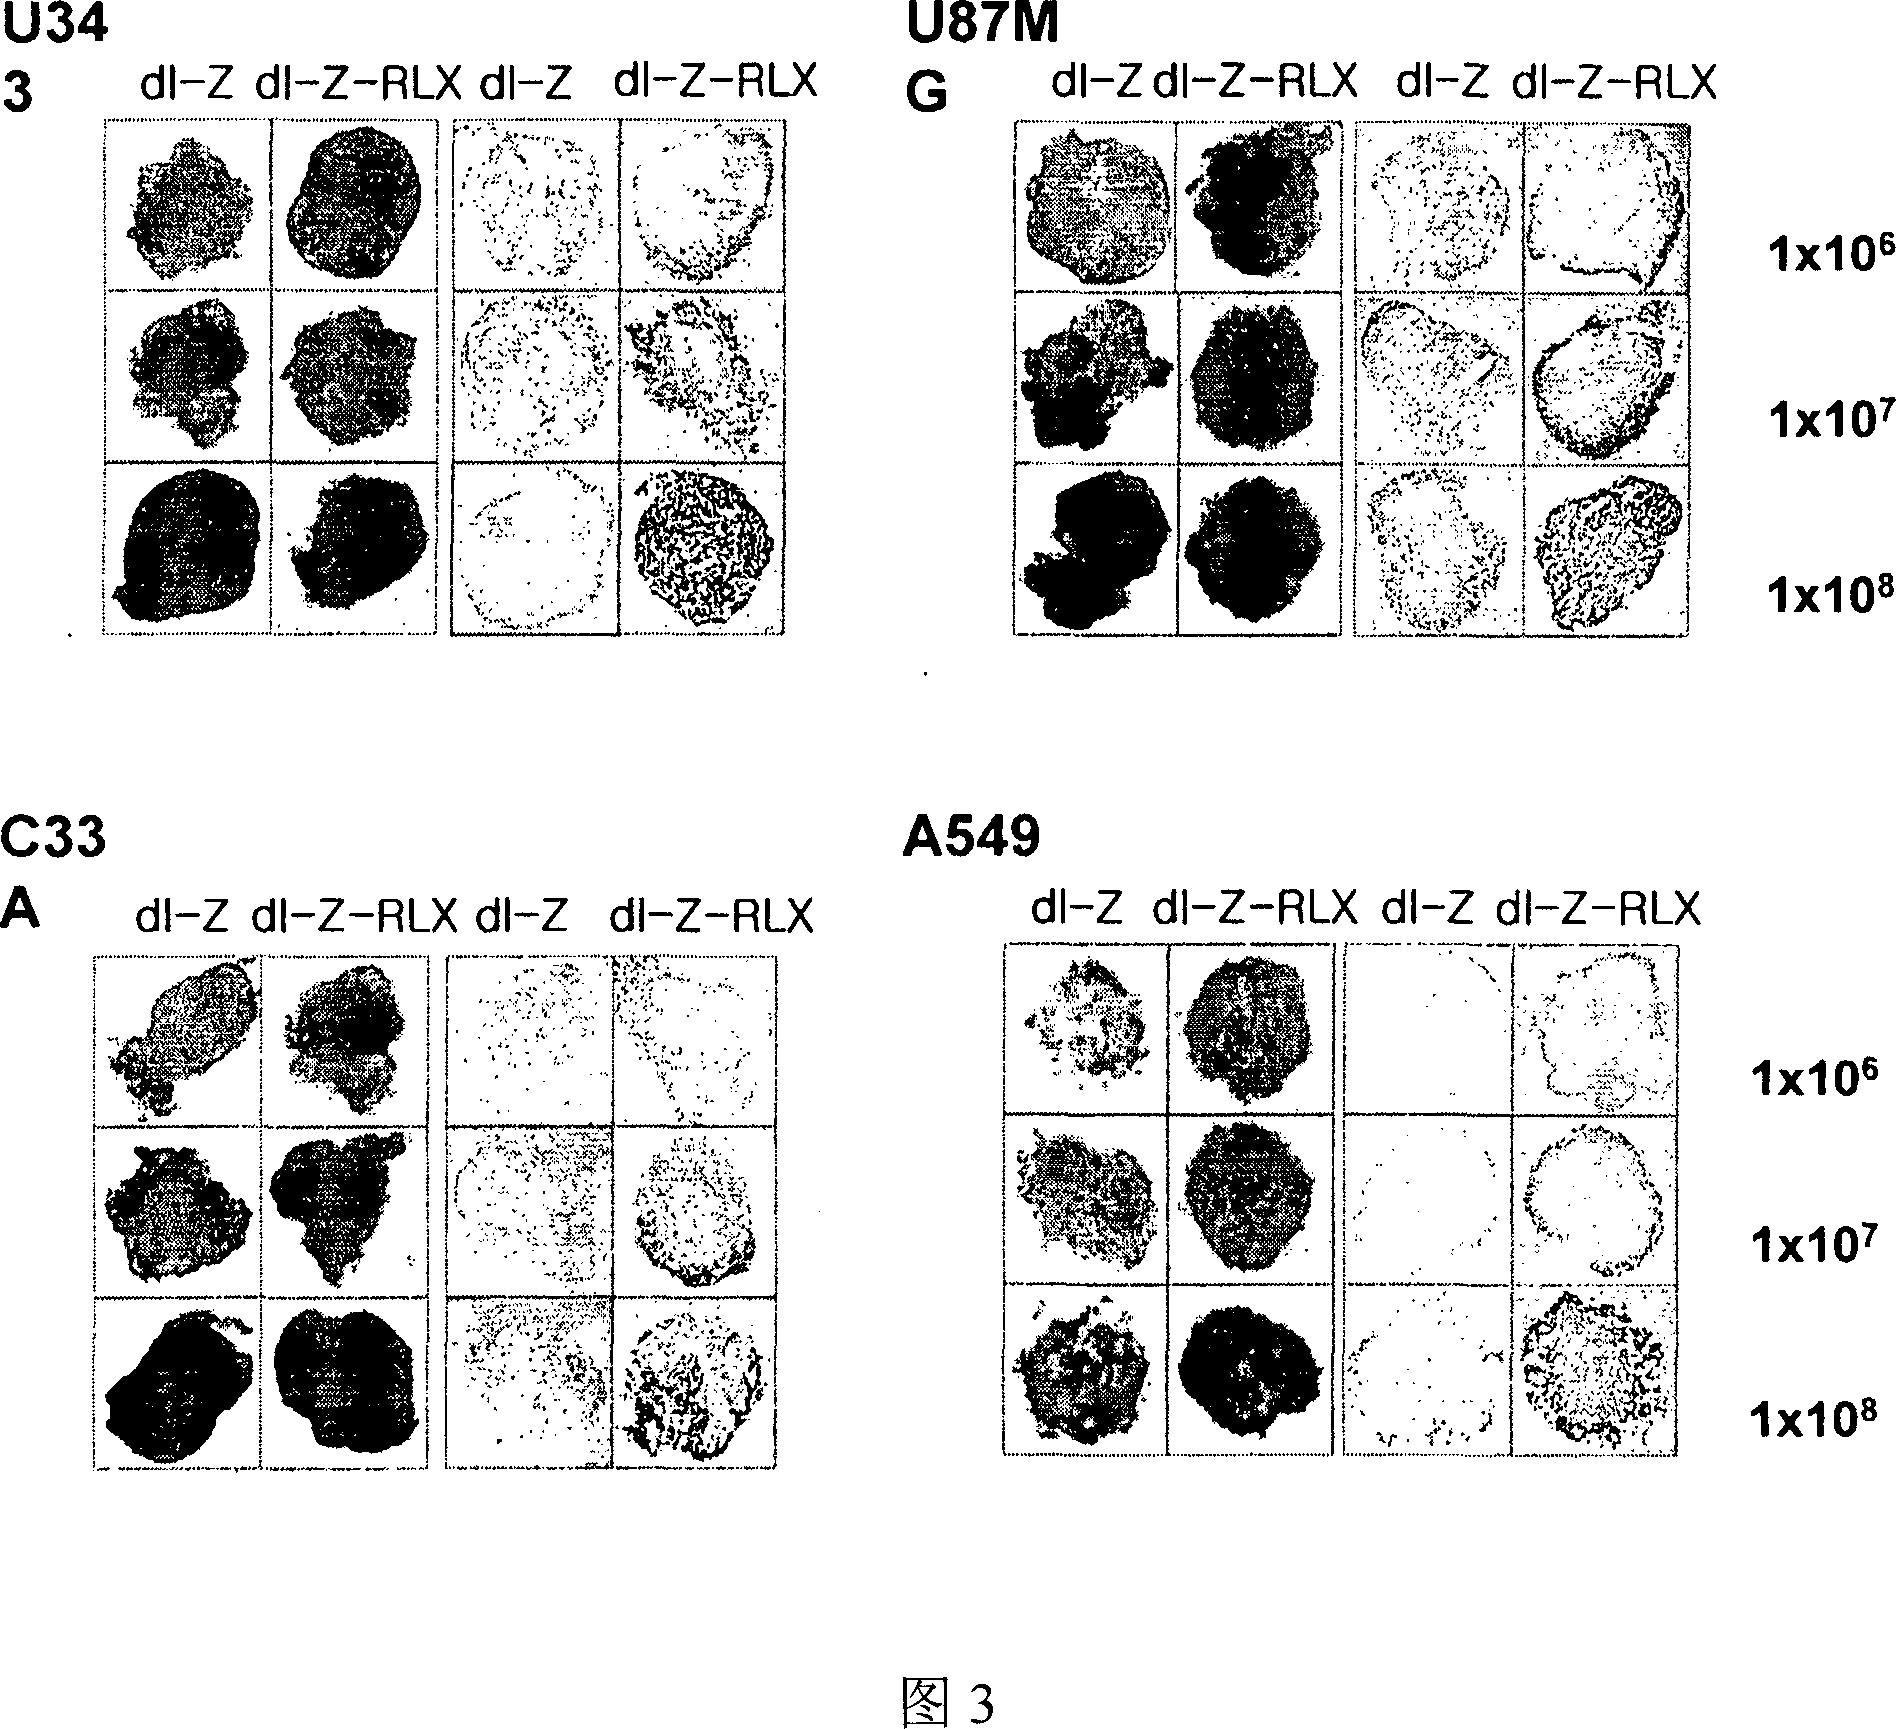 Gene delivery system containing relaxin gene and pharmaceutical composition using relaxin